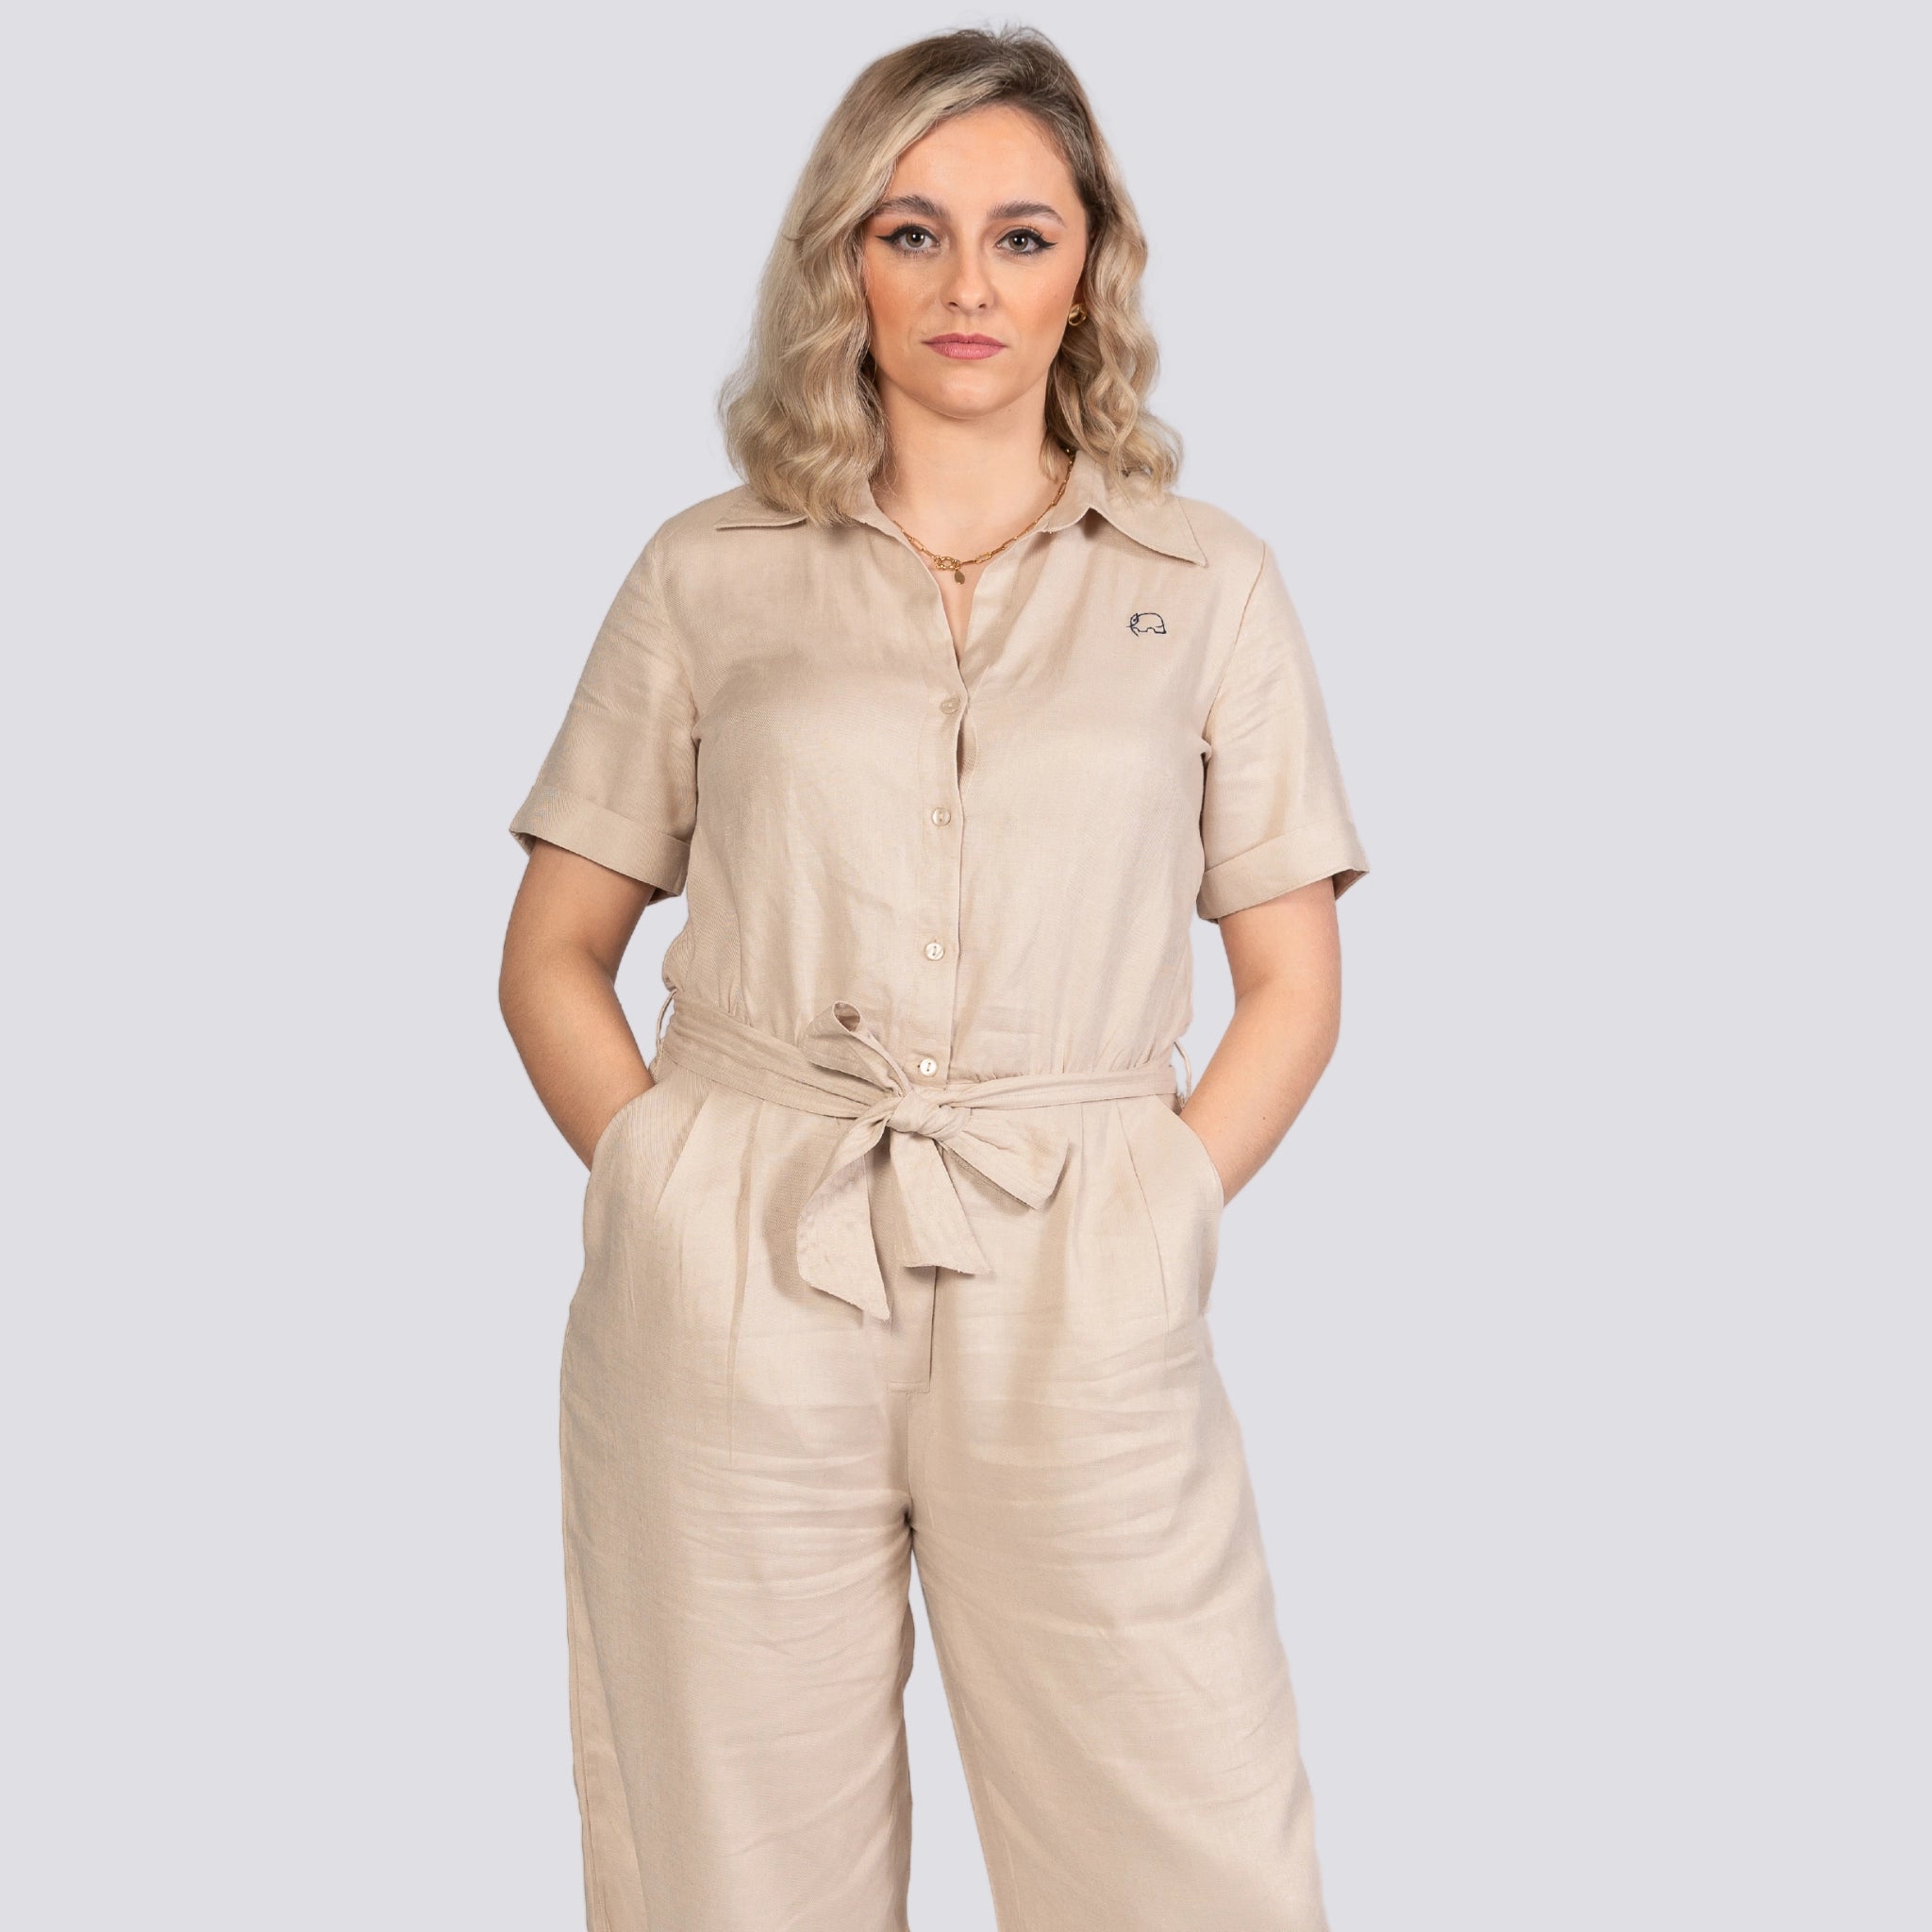 Woman standing against a grey background, wearing a Karee Merino Elegance Viscose Linen Jumpsuit with a tie waist, looking at the camera.